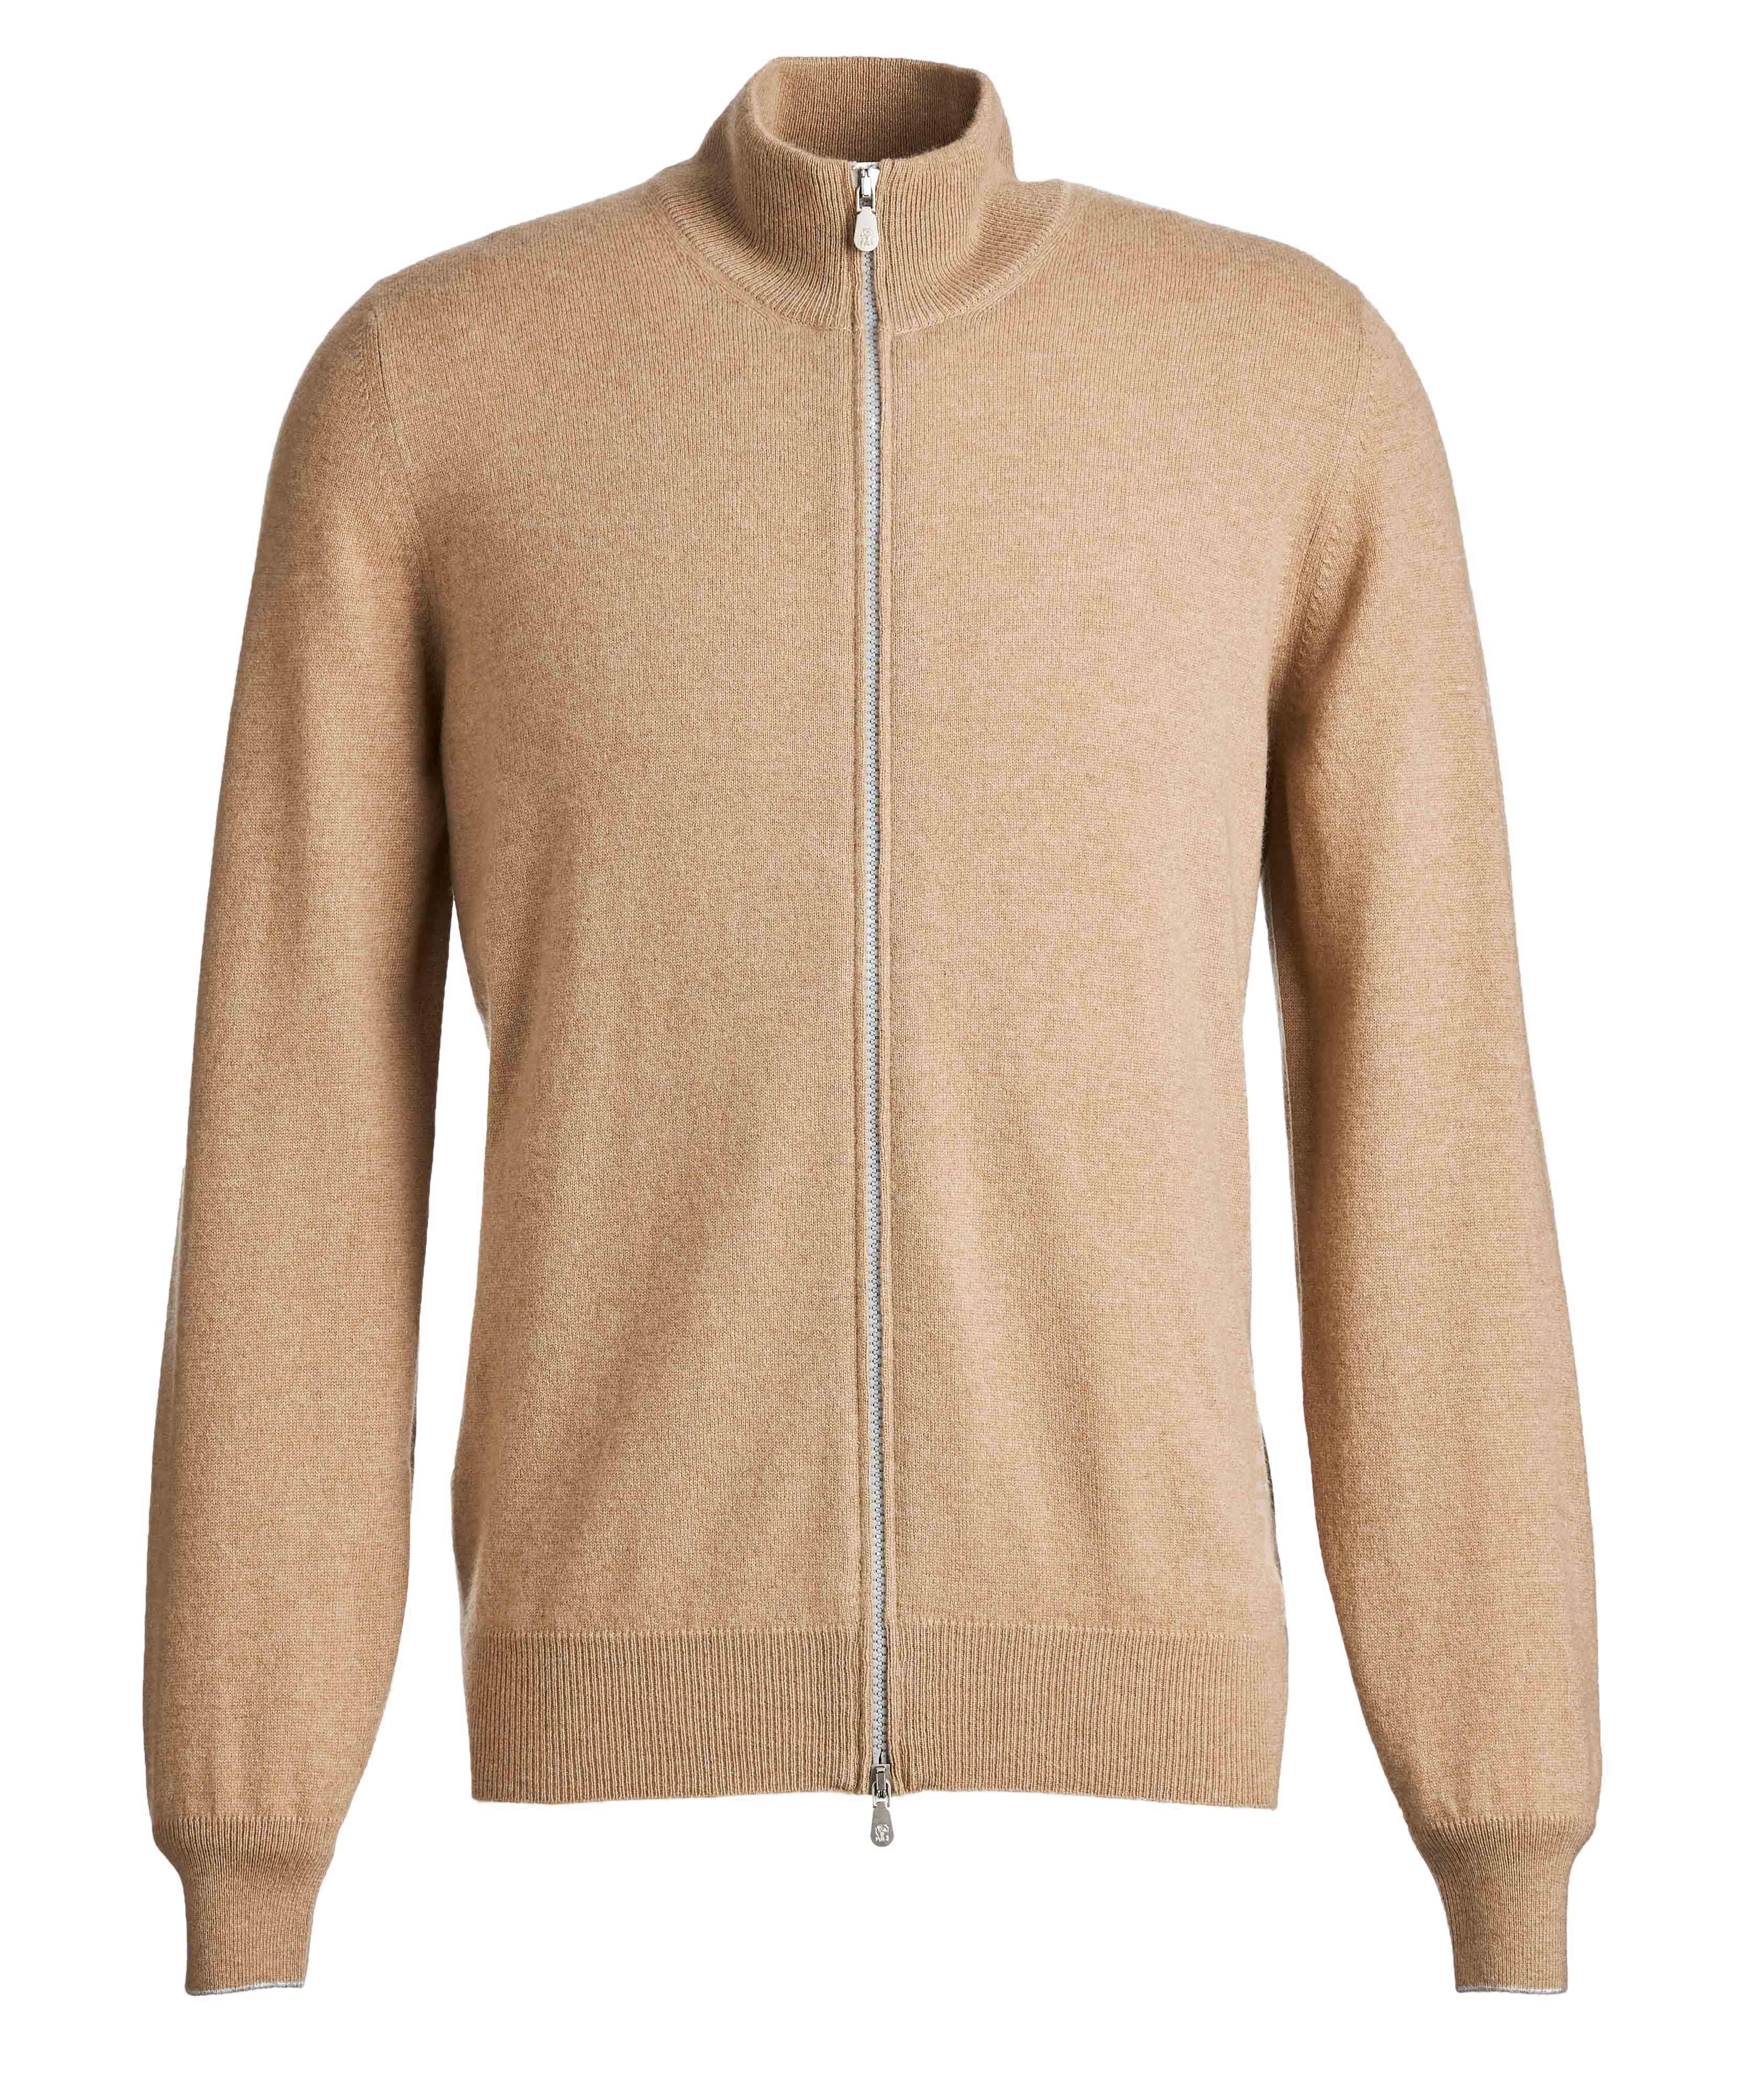 Zip-Up Cashmere Sweater image 0